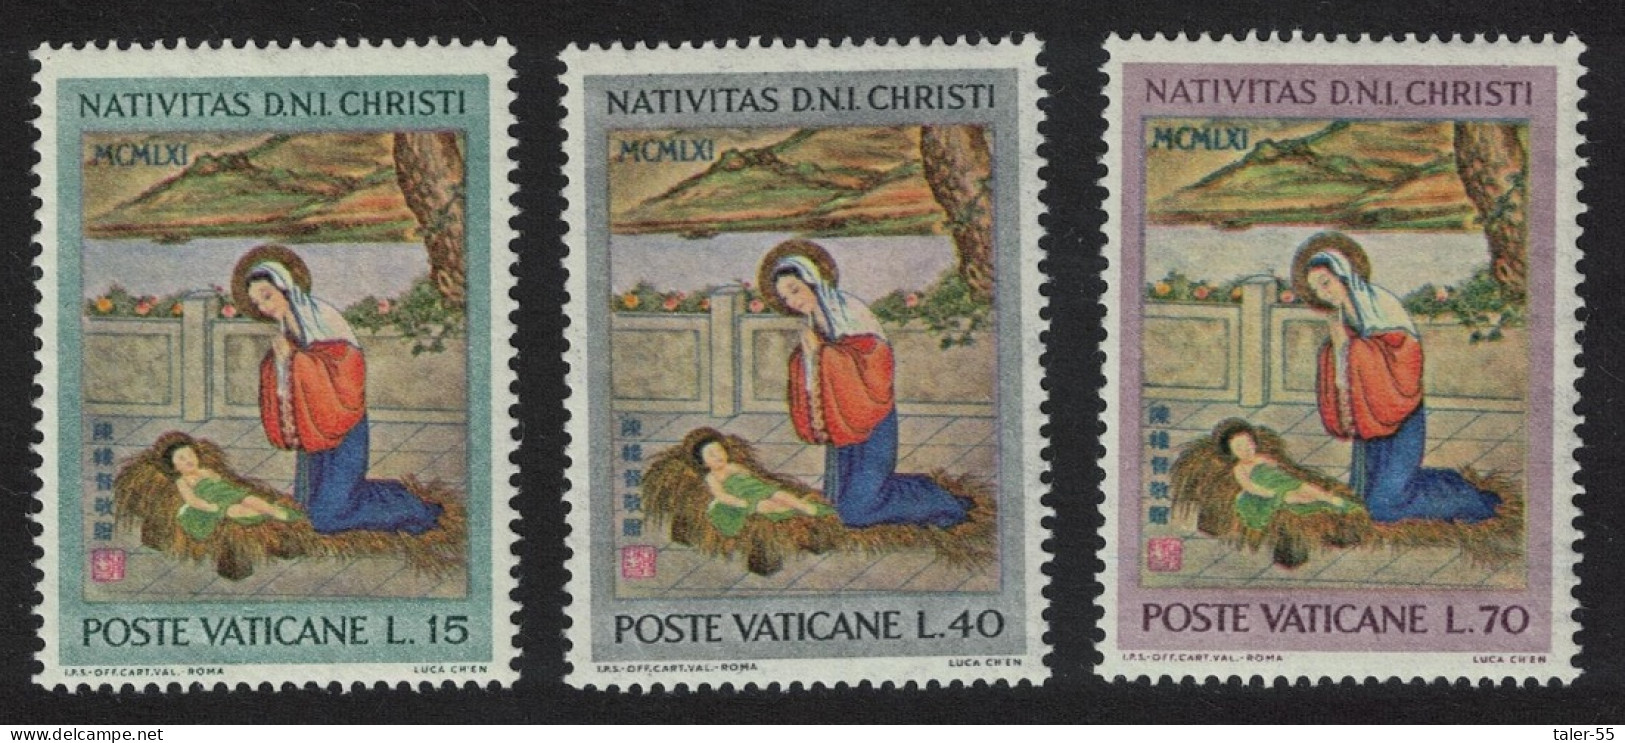 Vatican Christmas Centres 3v 1961 MNH SG#365-367 - Unused Stamps